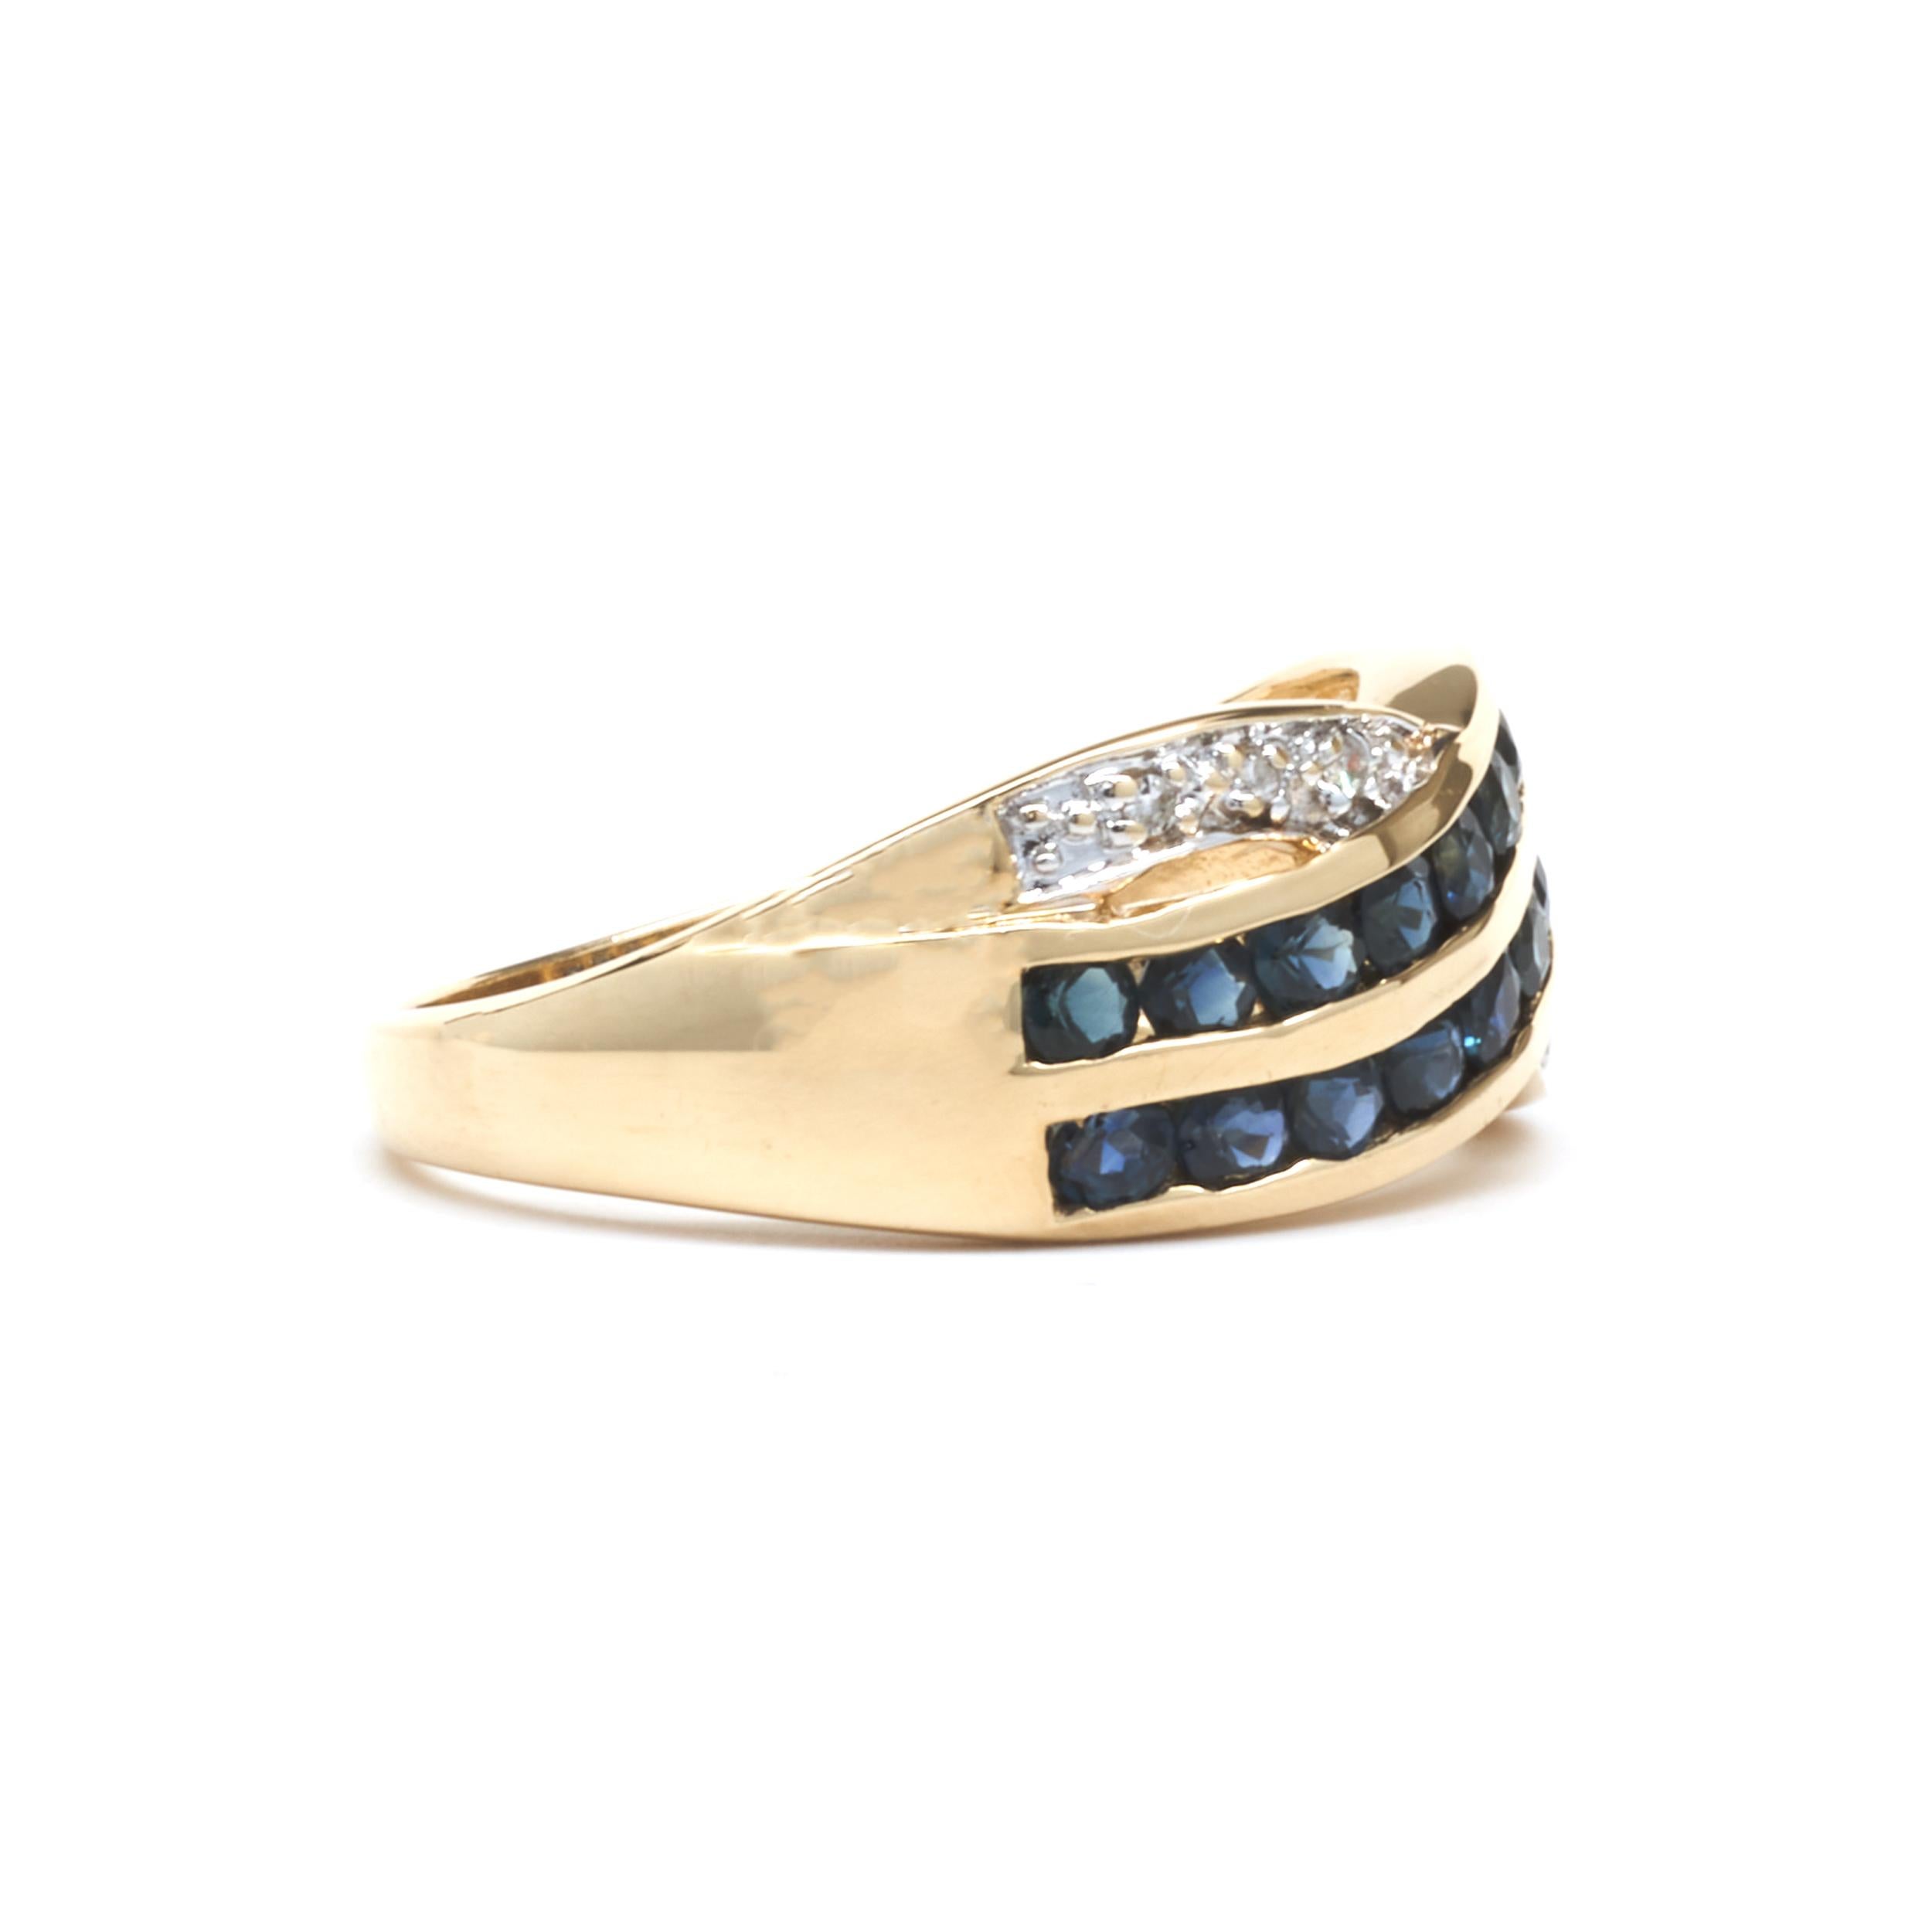 Designer: custom design
Material: 14K yellow gold
Diamond: 6 round cut = .06cttw
Color: H
Clarity: SI2
Sapphire: 20 round cut = 1.00cttw
Color: Blue
Clarity: A
Dimensions: ring top measures 9mm wide
Ring Size: 8.25 (please allow two extra shipping